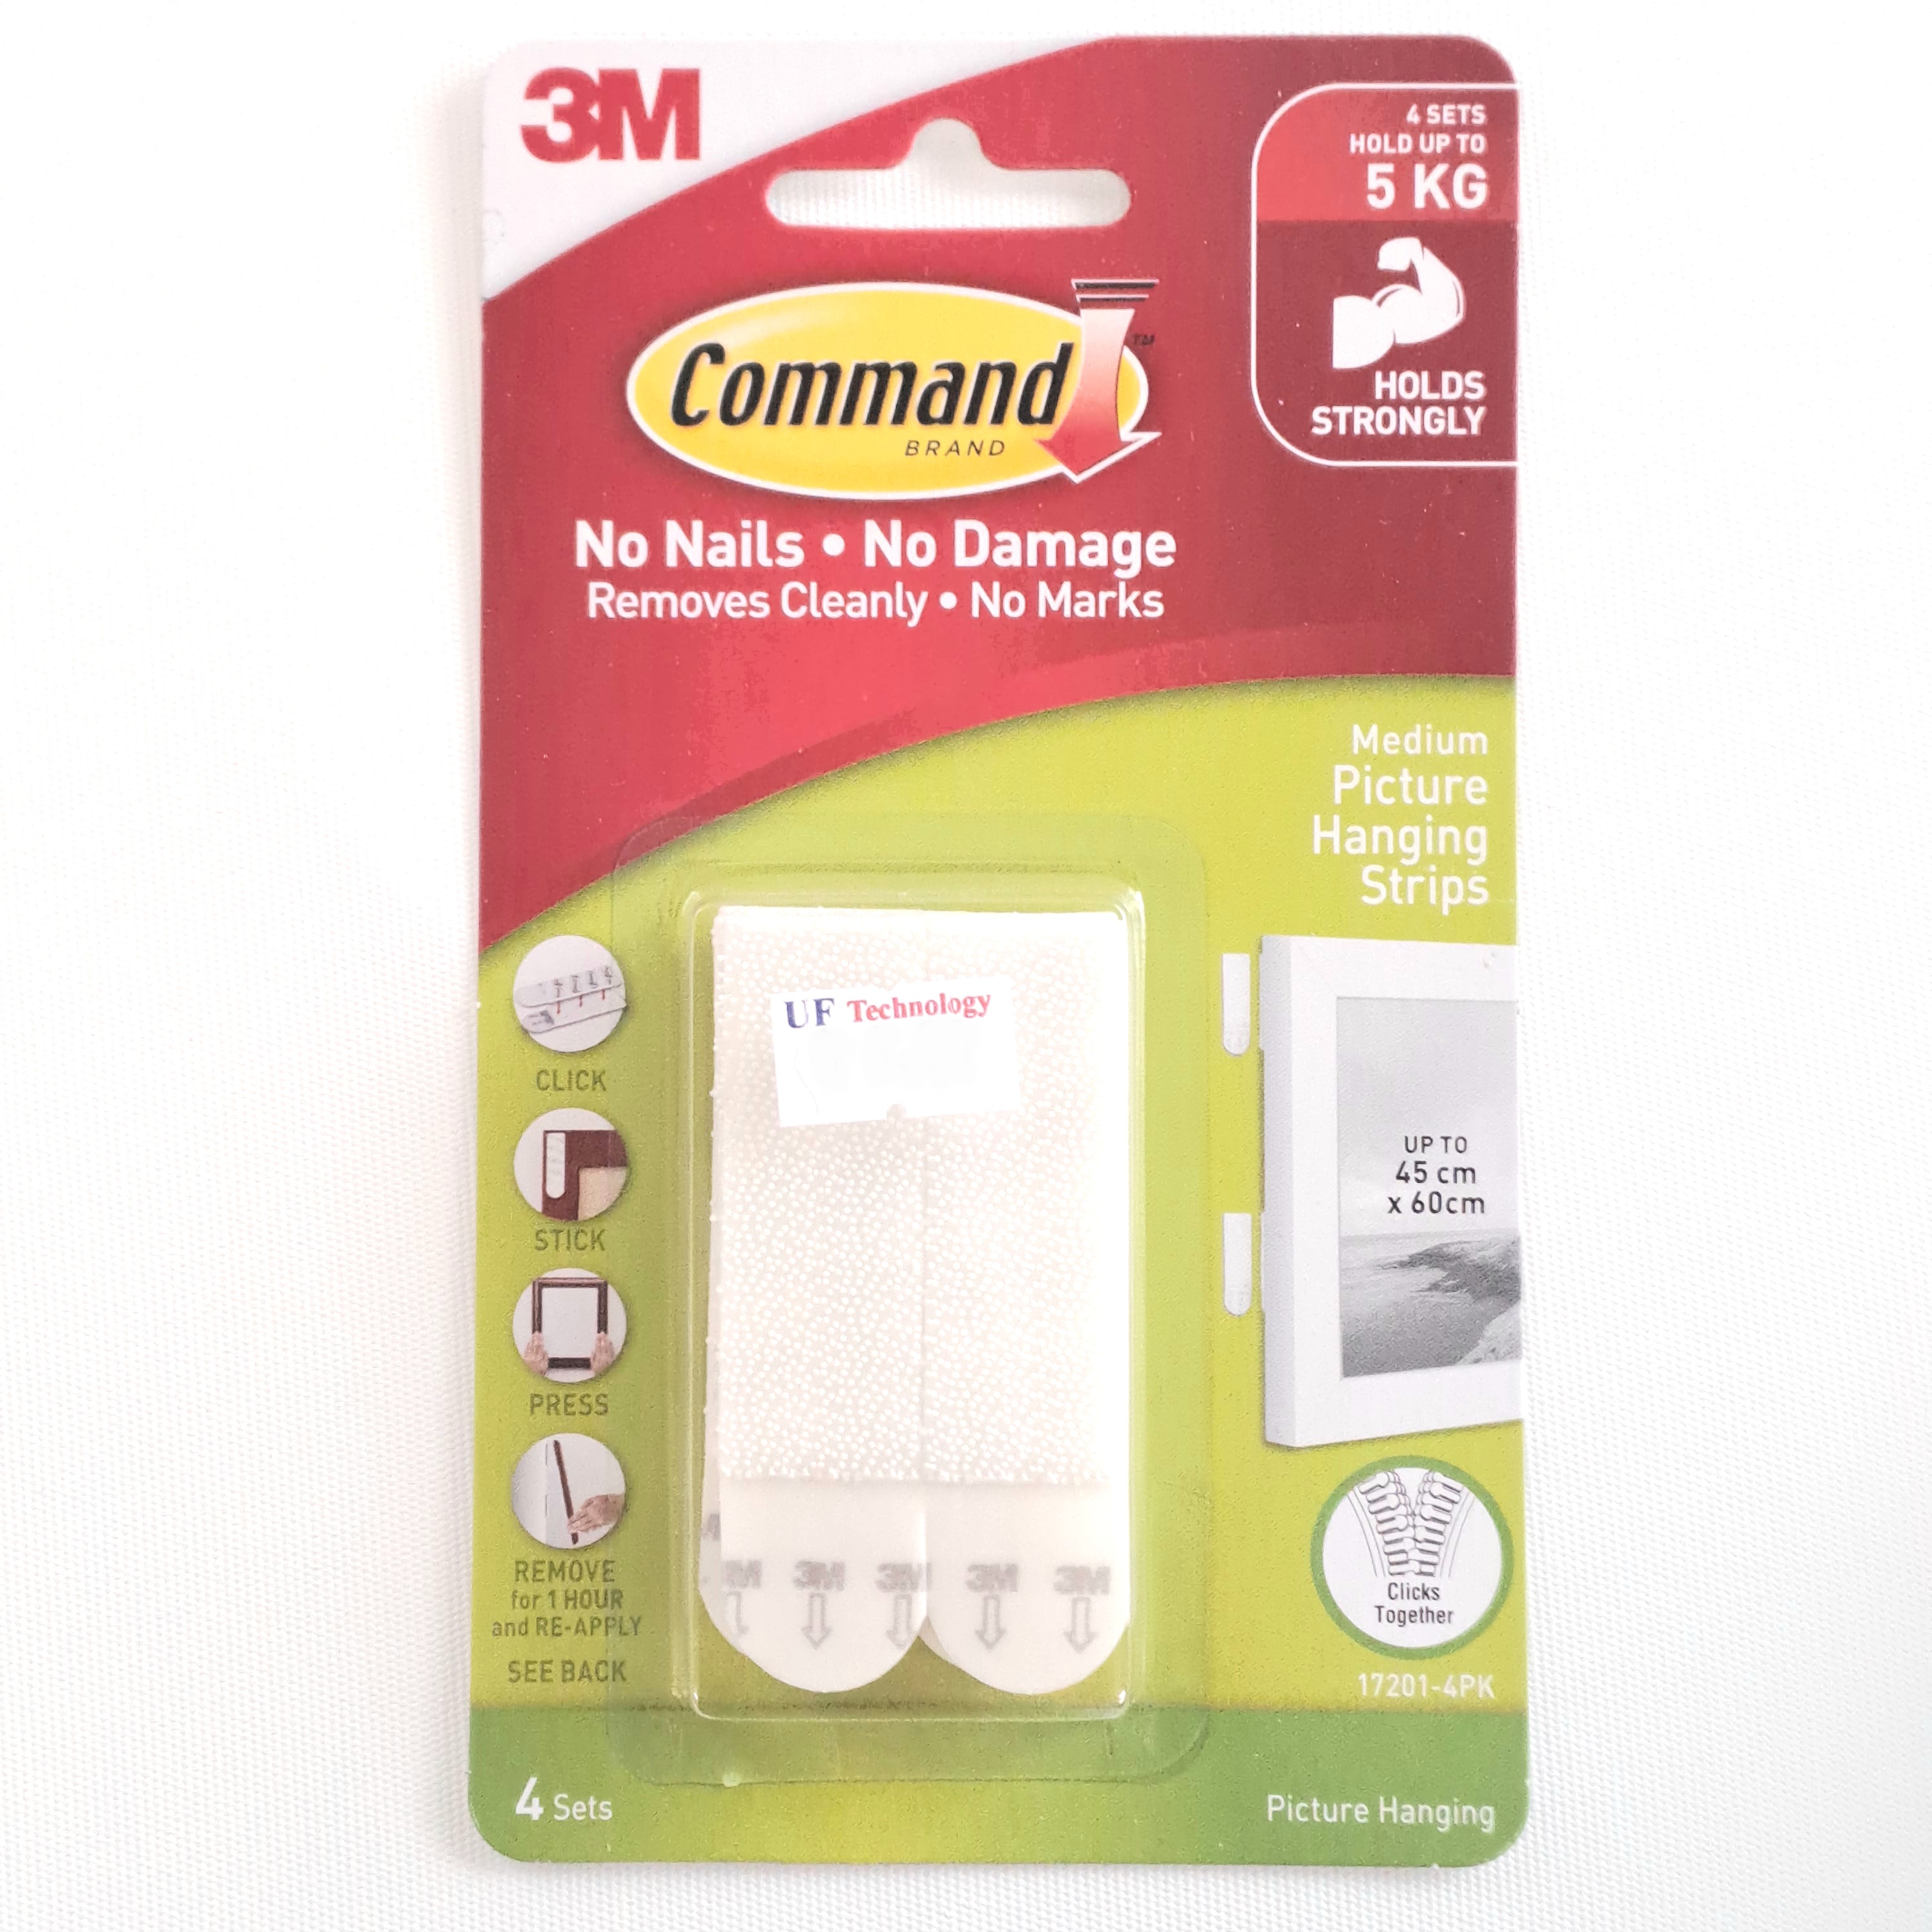 3M Command Medium Picture Hanging Strips 8 Strips/4 sets (21011)